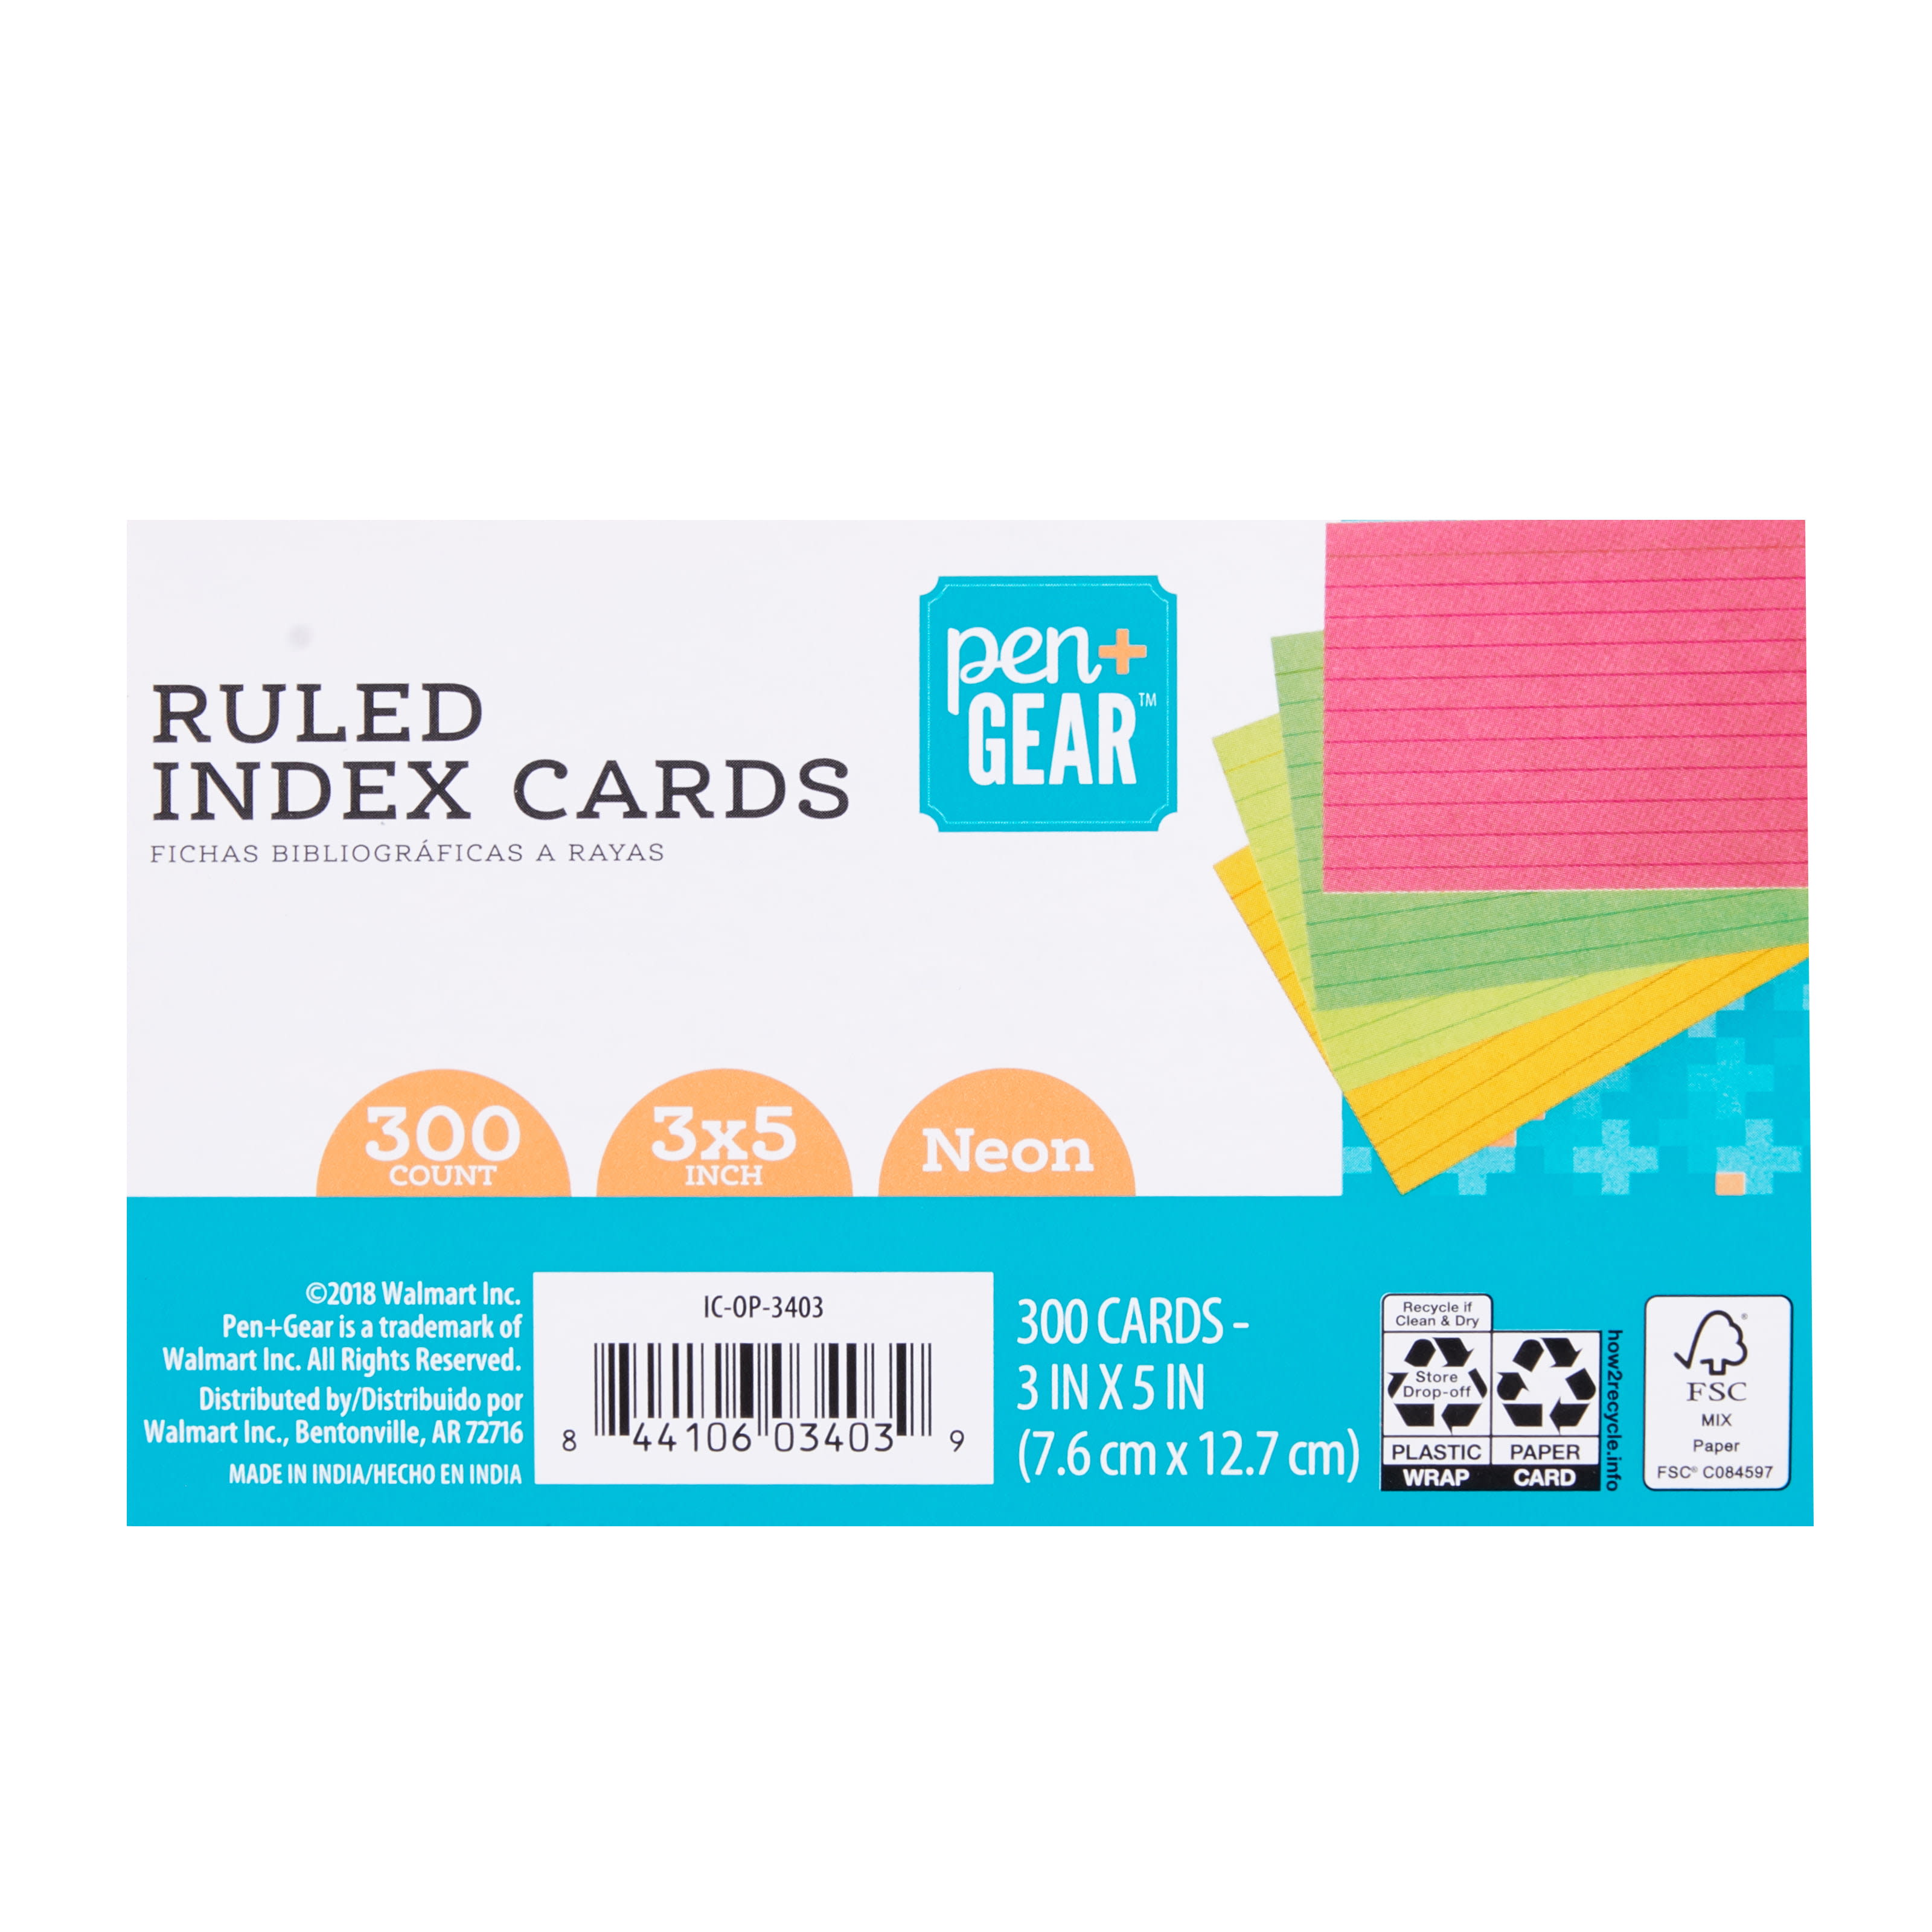 Pen+ Gear Ruled Index Cards, White, 500 Count, 3 x 5